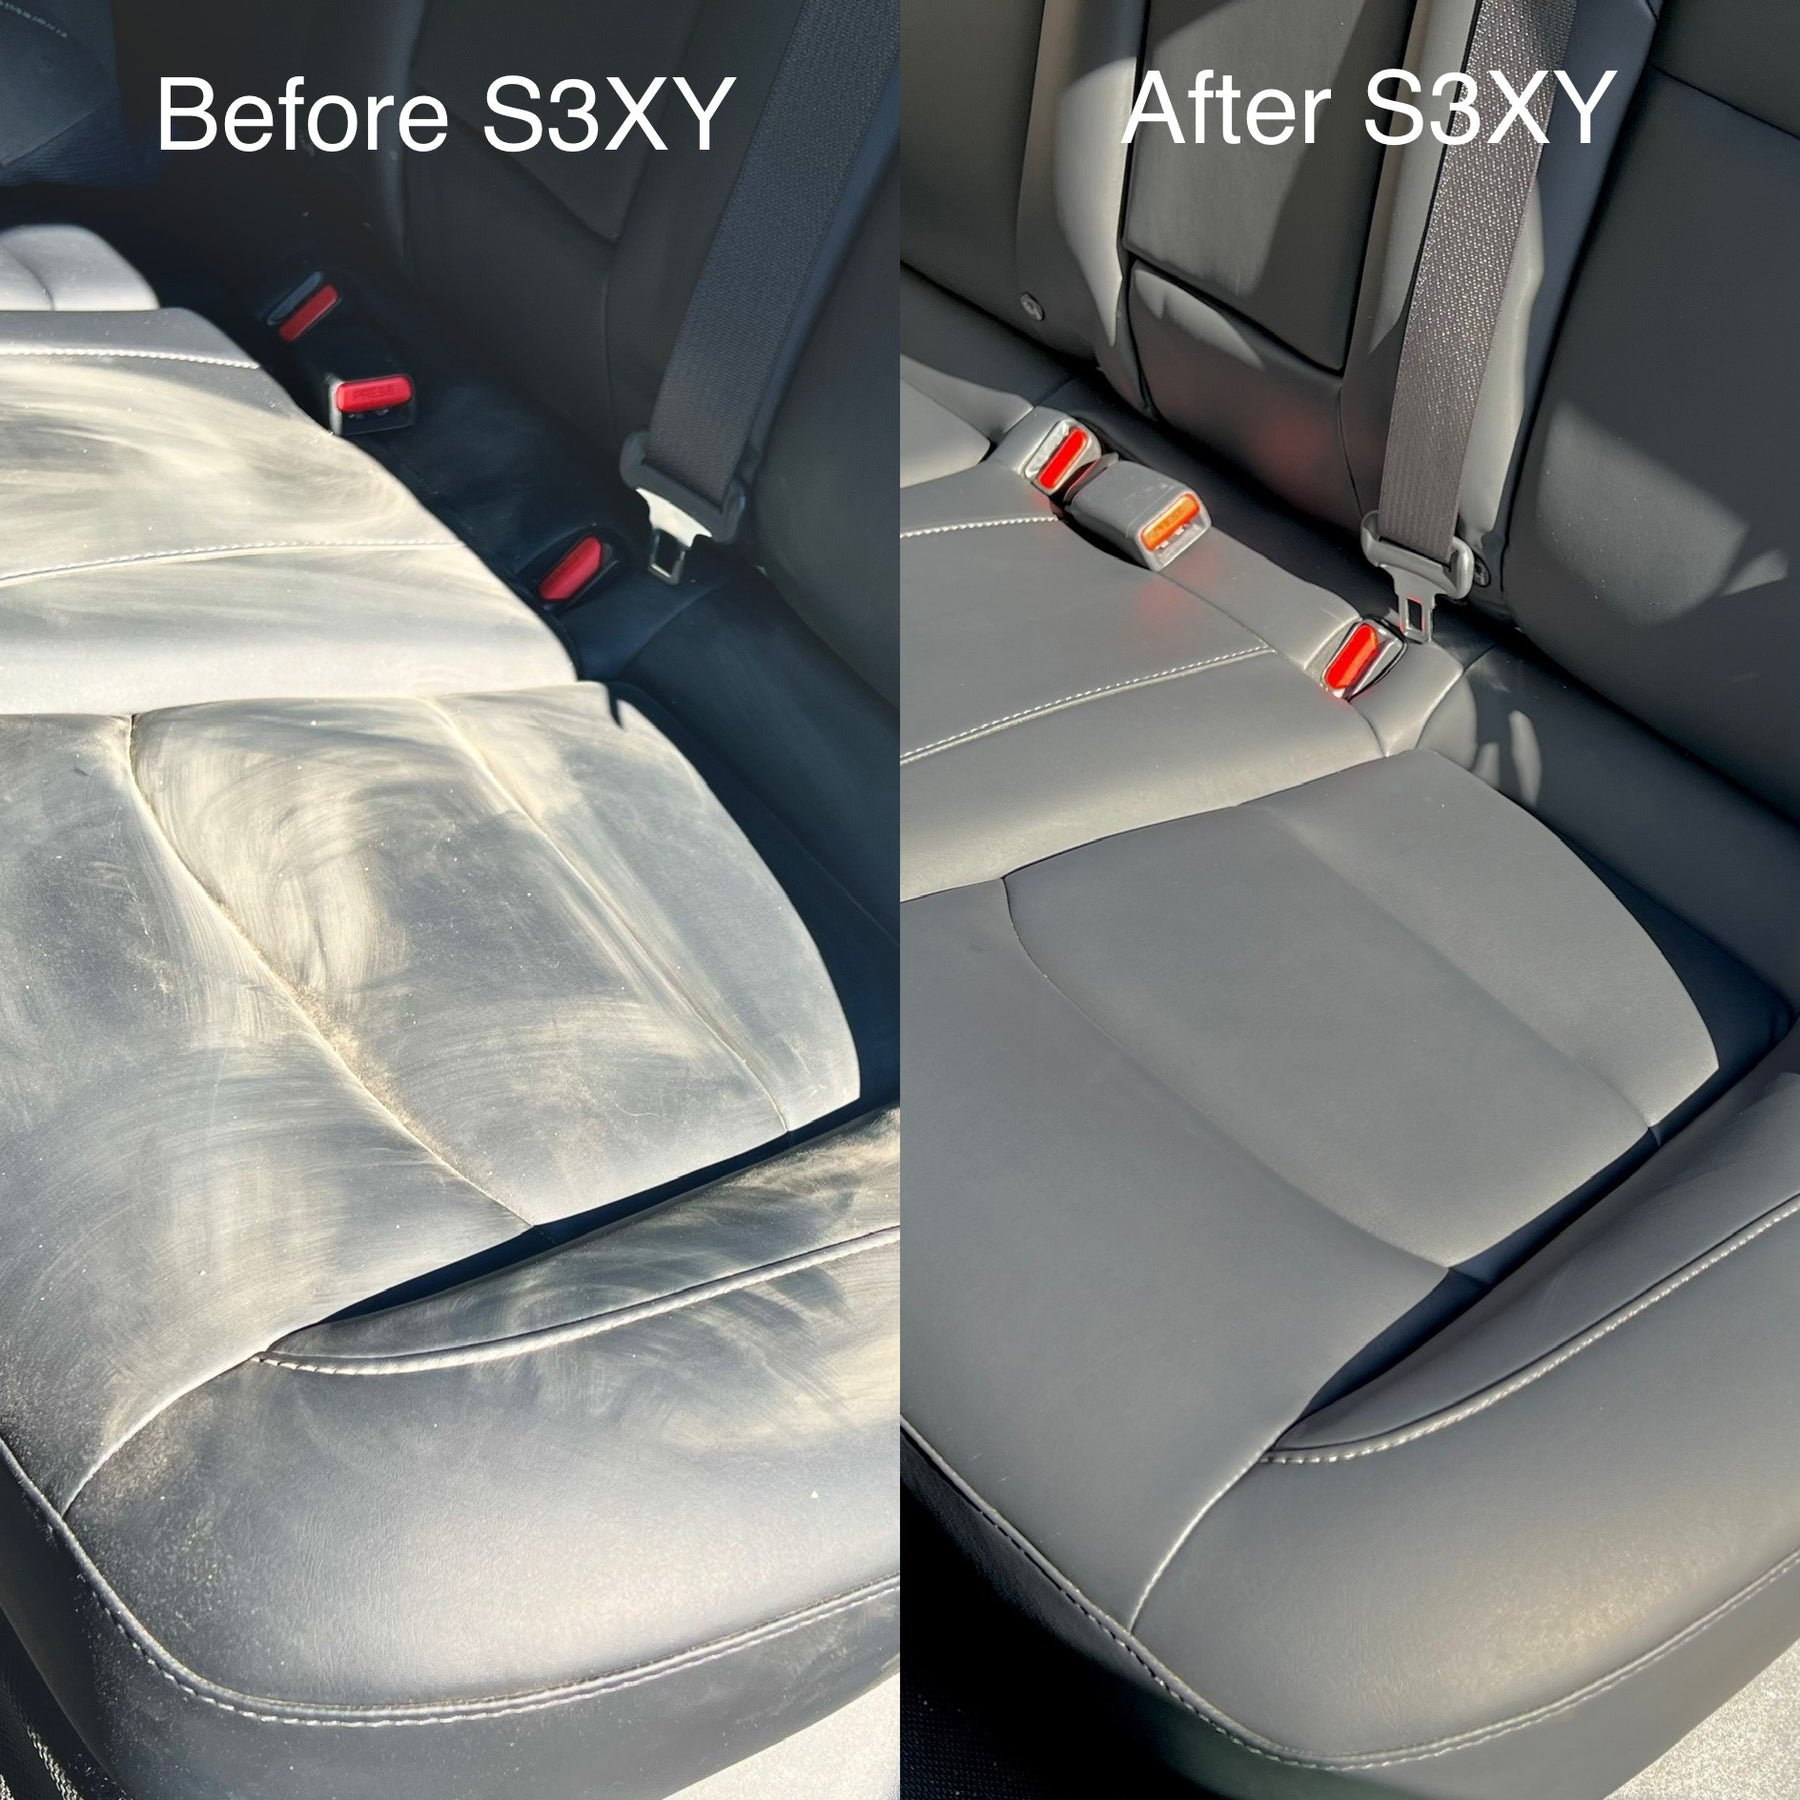  TesLiner Tesla Seat Cleaner for White, Black, Cream Vegan  Leather, Helps with Blue Dye, Stains, Safe on All Surfaces, Interior Cleaner  for Model 3 Y S X